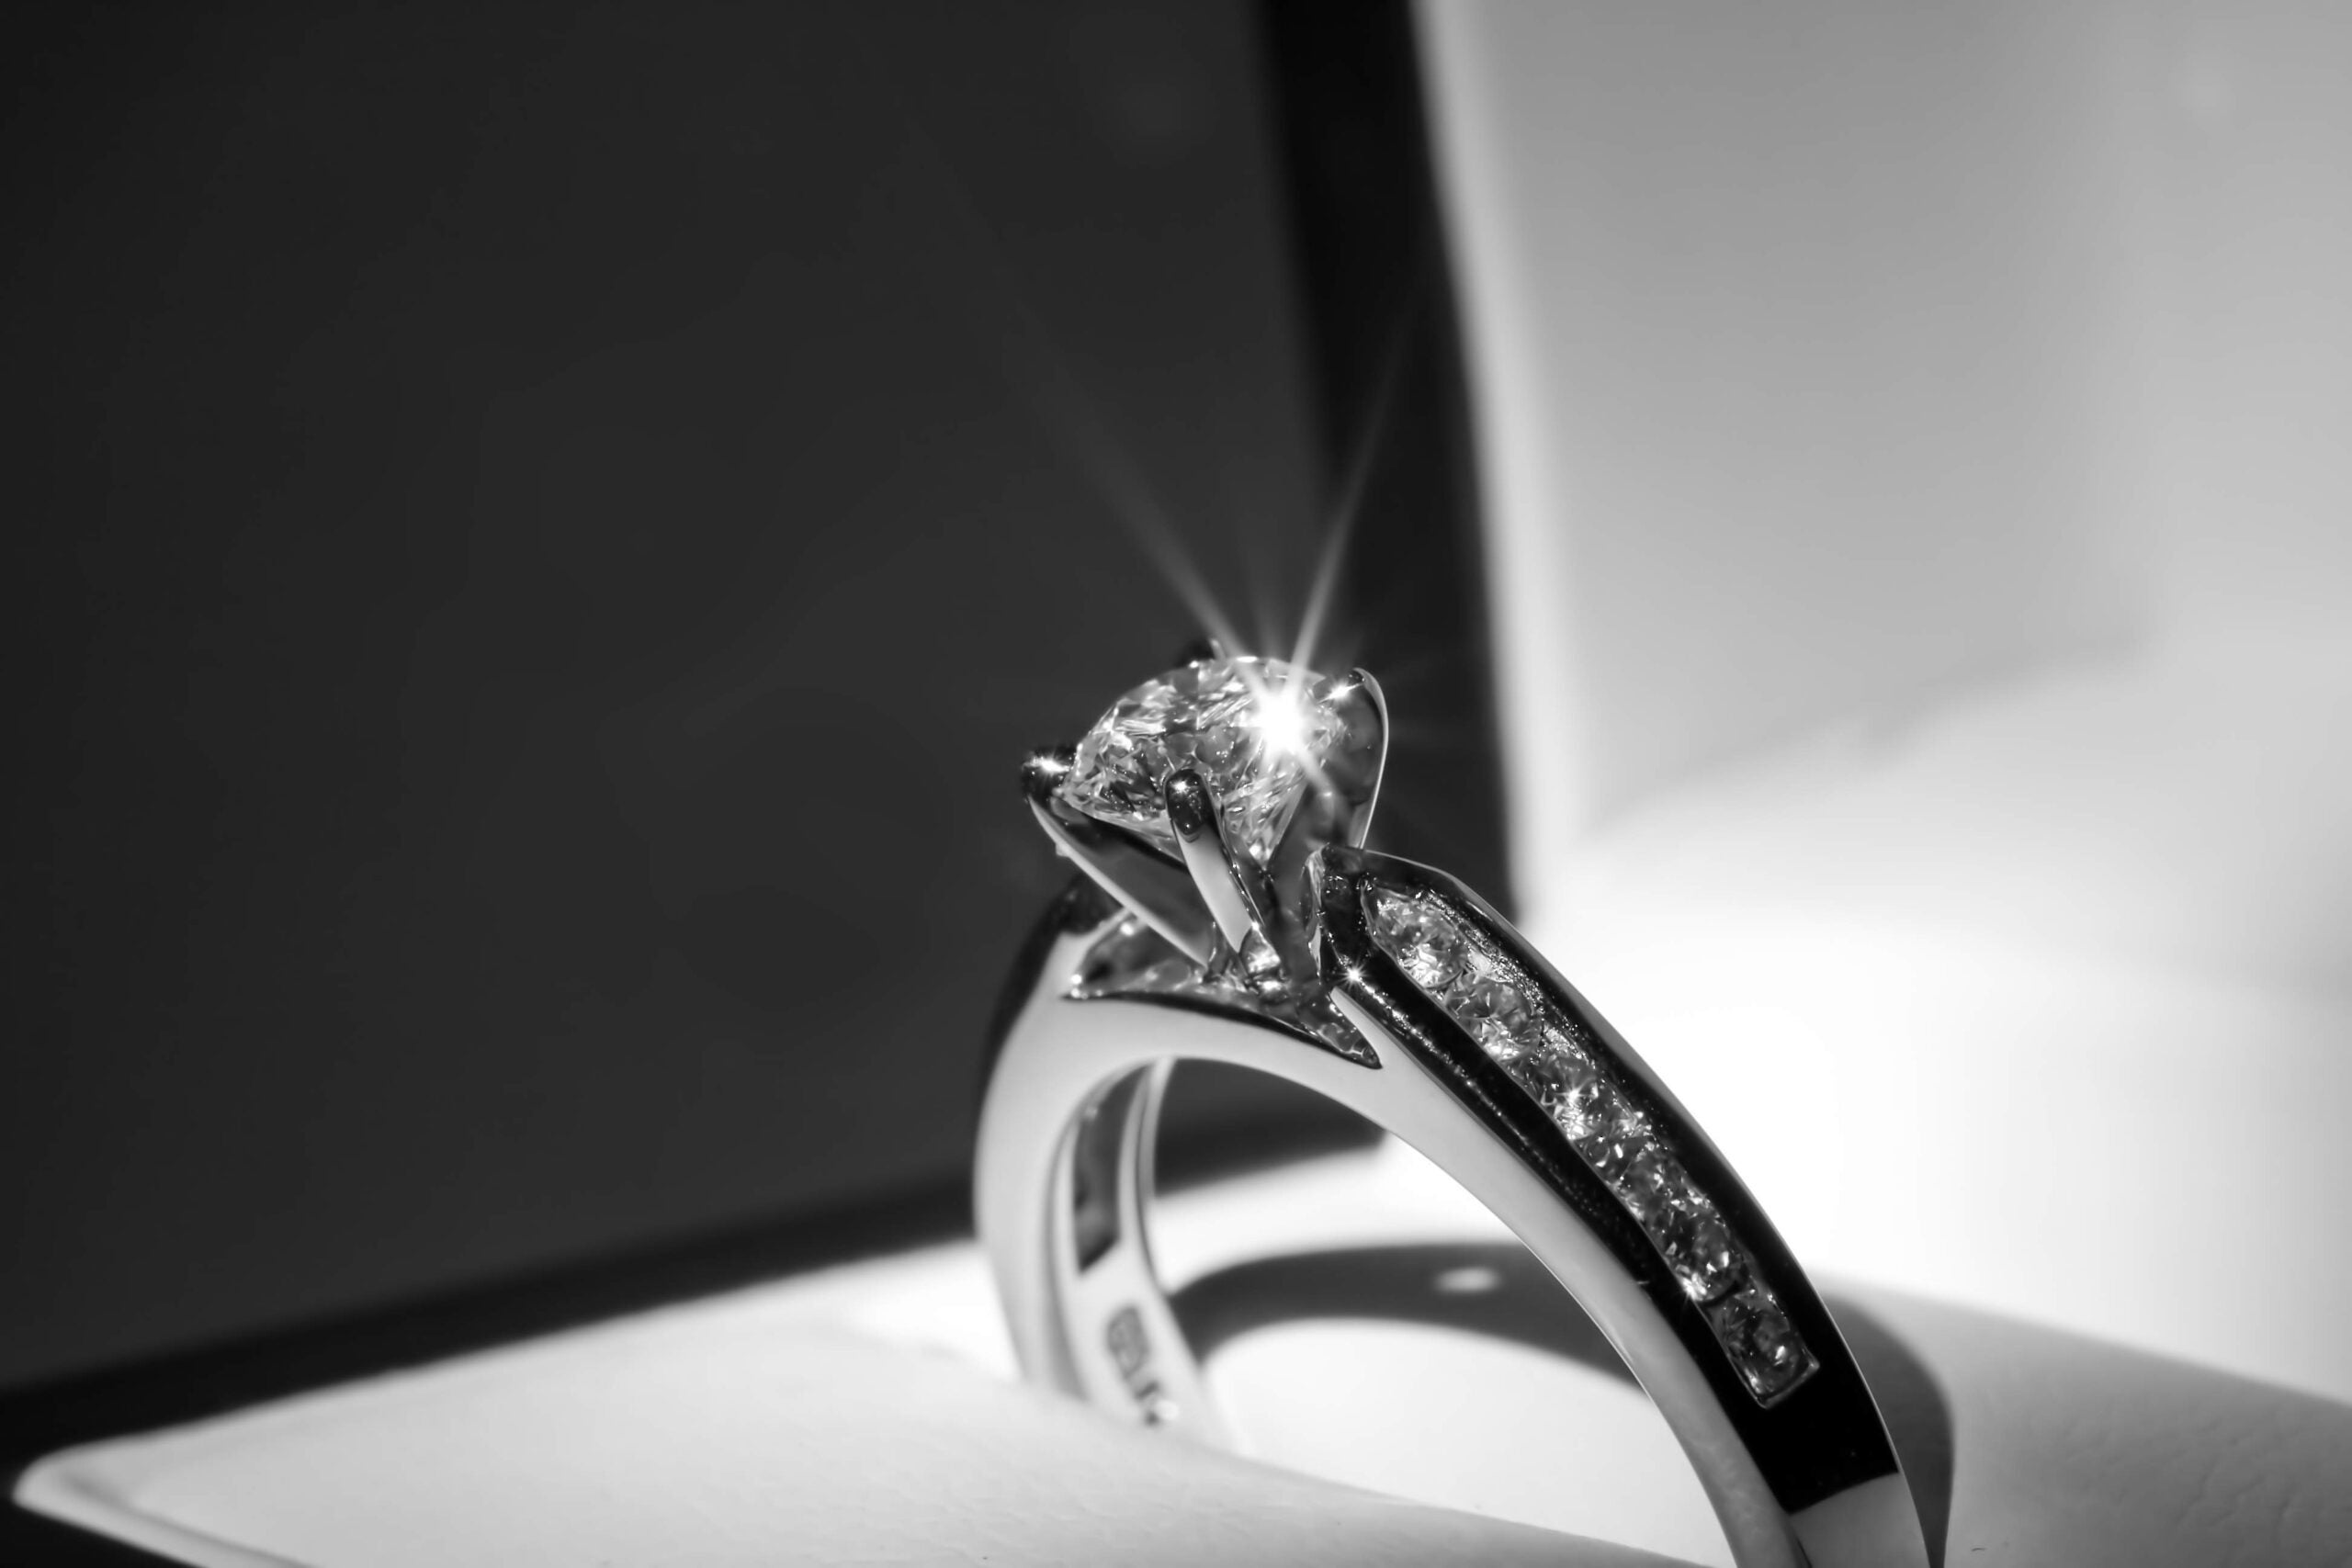 Why Hatton Garden is the place to buy engagement rings - Shining Diamonds